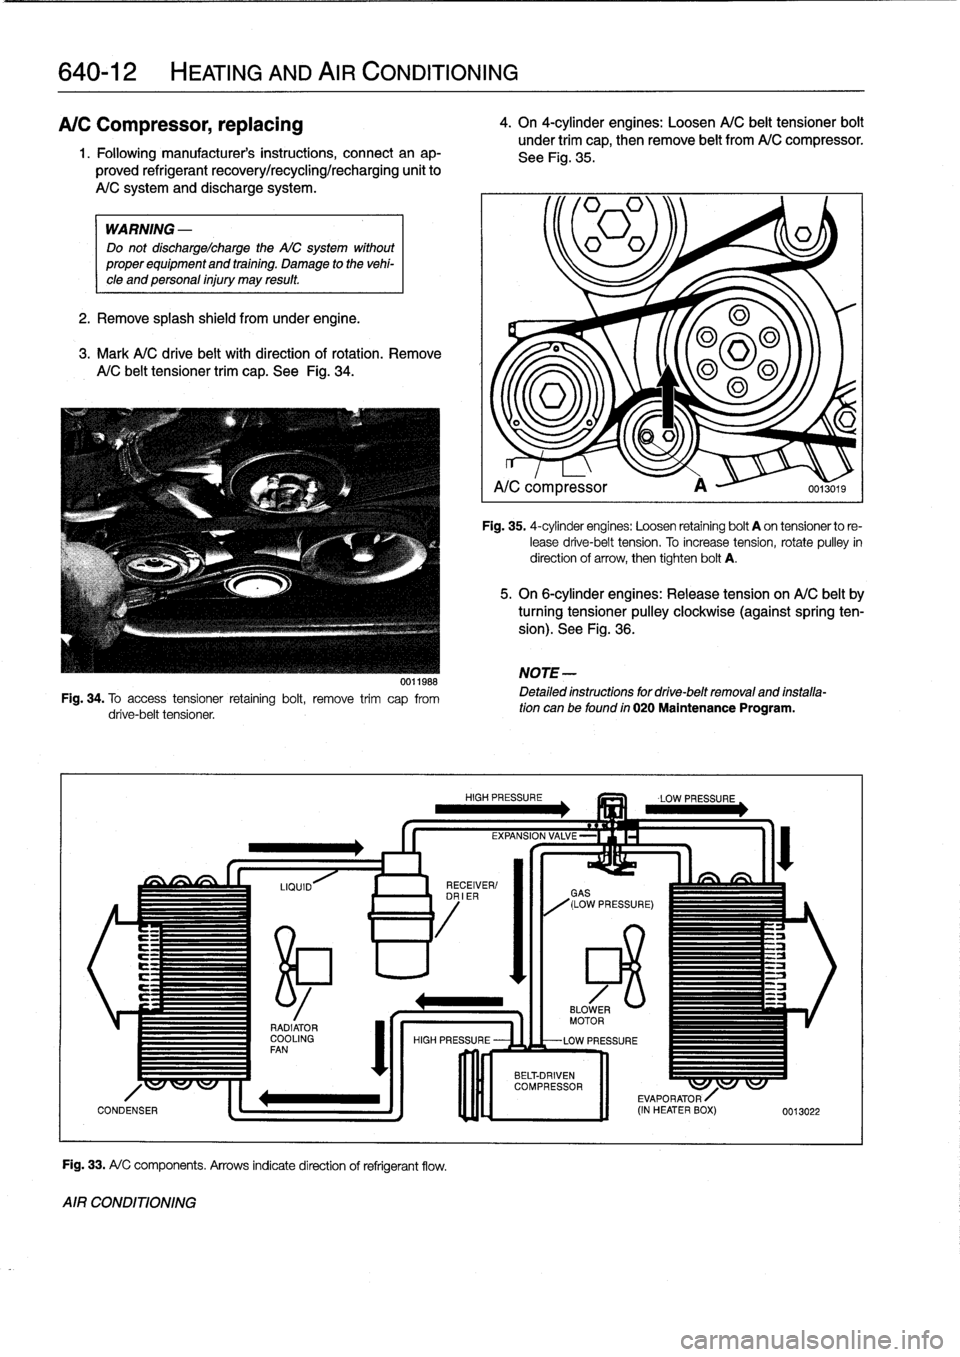 BMW 318i 1998 E36 Repair Manual 
640-12

	

HEATING
AND
AIR
CONDITIONING

A/C
Compressor,
replacing

1
.
Followingmanufacturers
instructions,
connectanap-

proved
refrigerant
recovery/recycling/recharging
unit
to

A/C
system
and
di